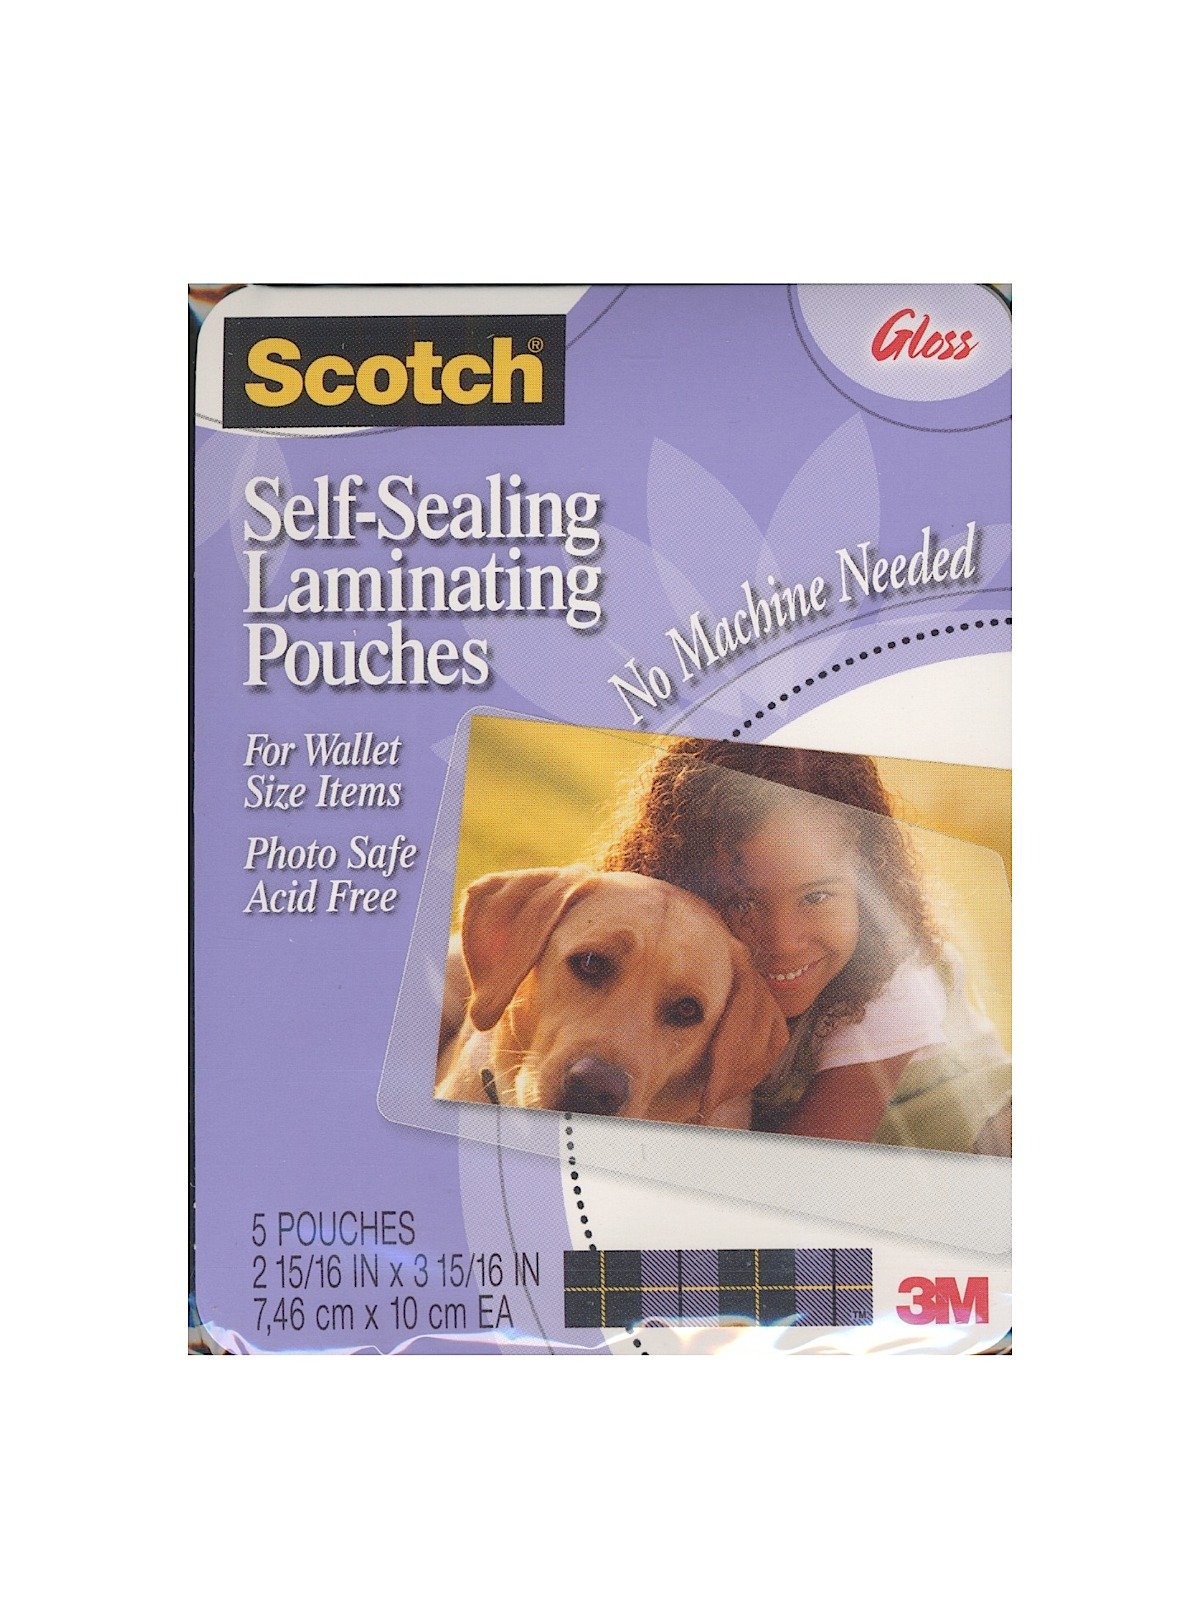 What is the difference between a laminating sheet and a laminating